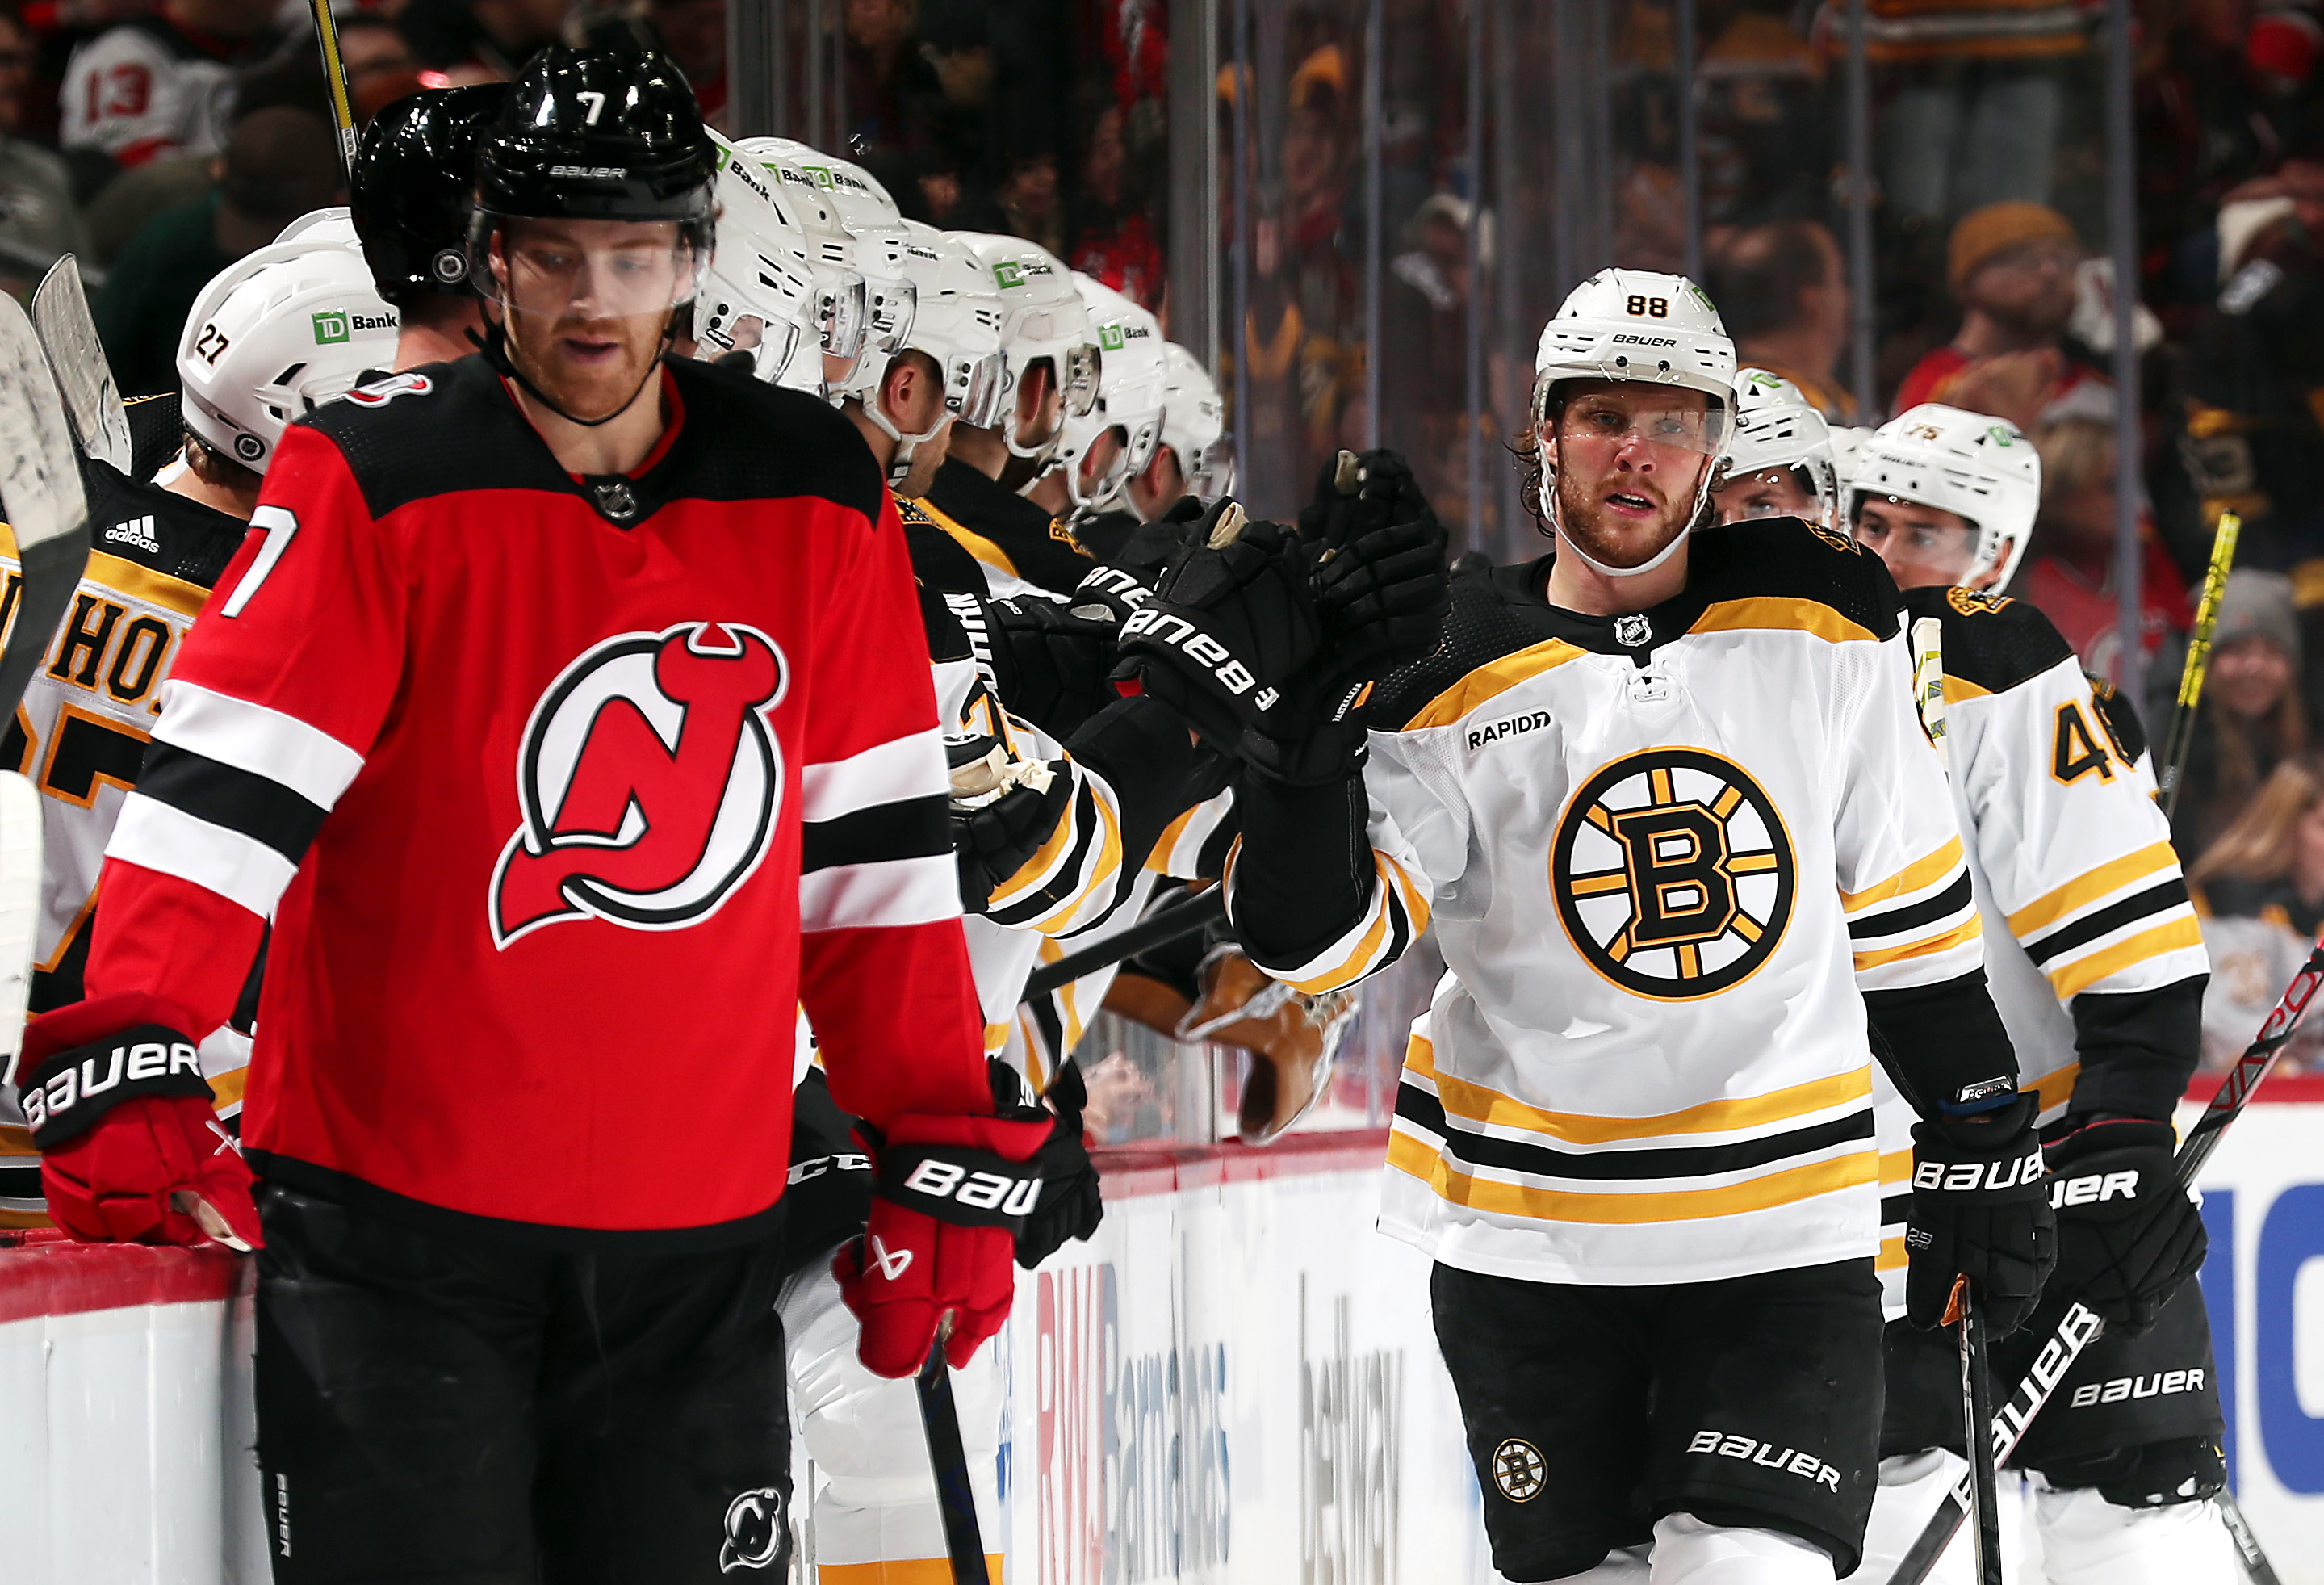 Bruins Bounce Back Big with 8-1 Win Over Devils - CLNS Media